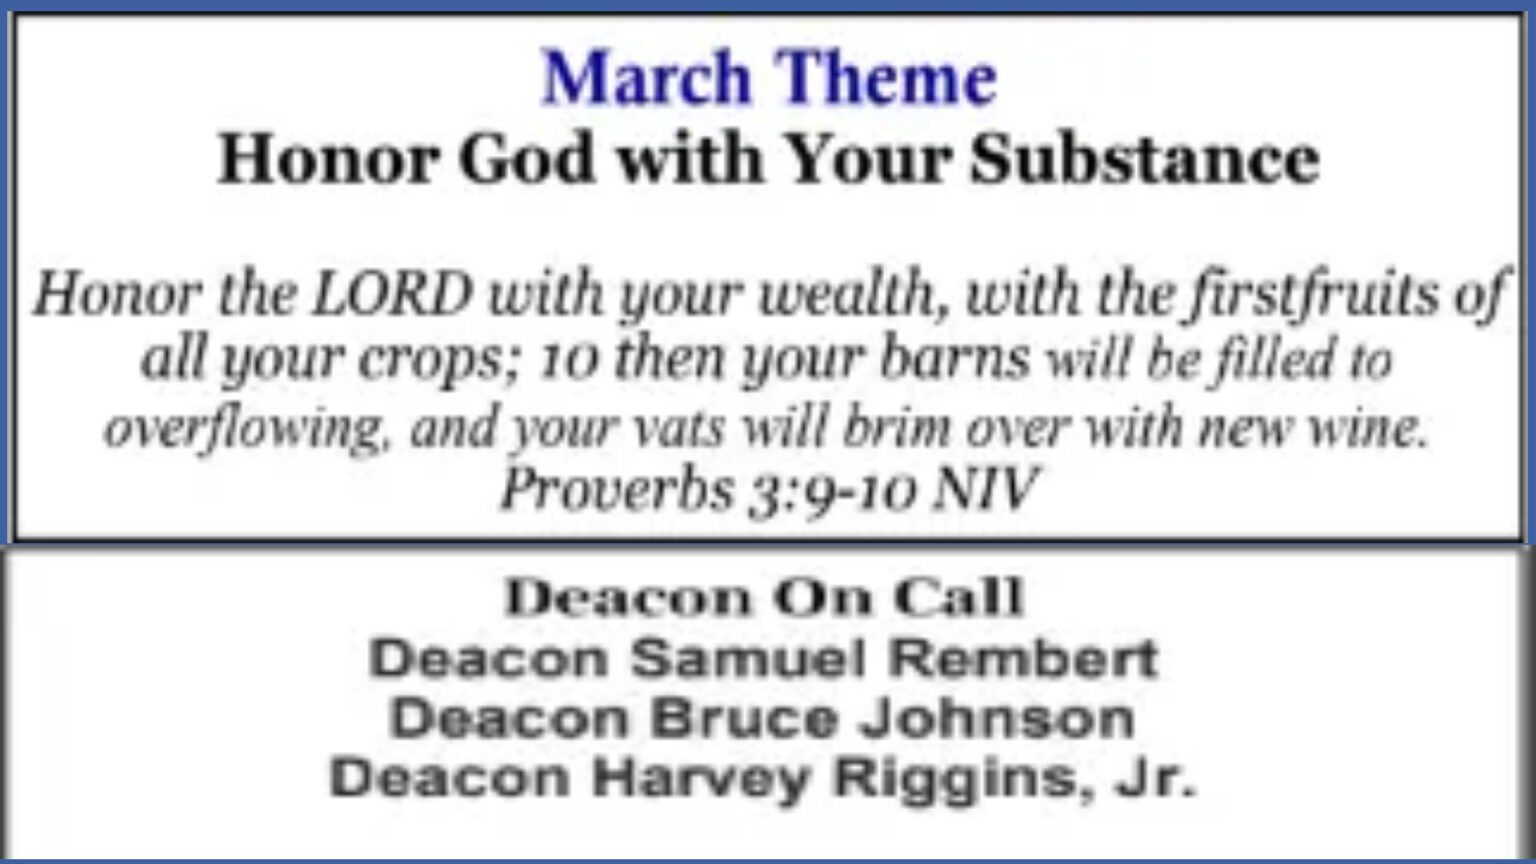 March 24 Theme and Deacon on call - Made with PosterMyWall